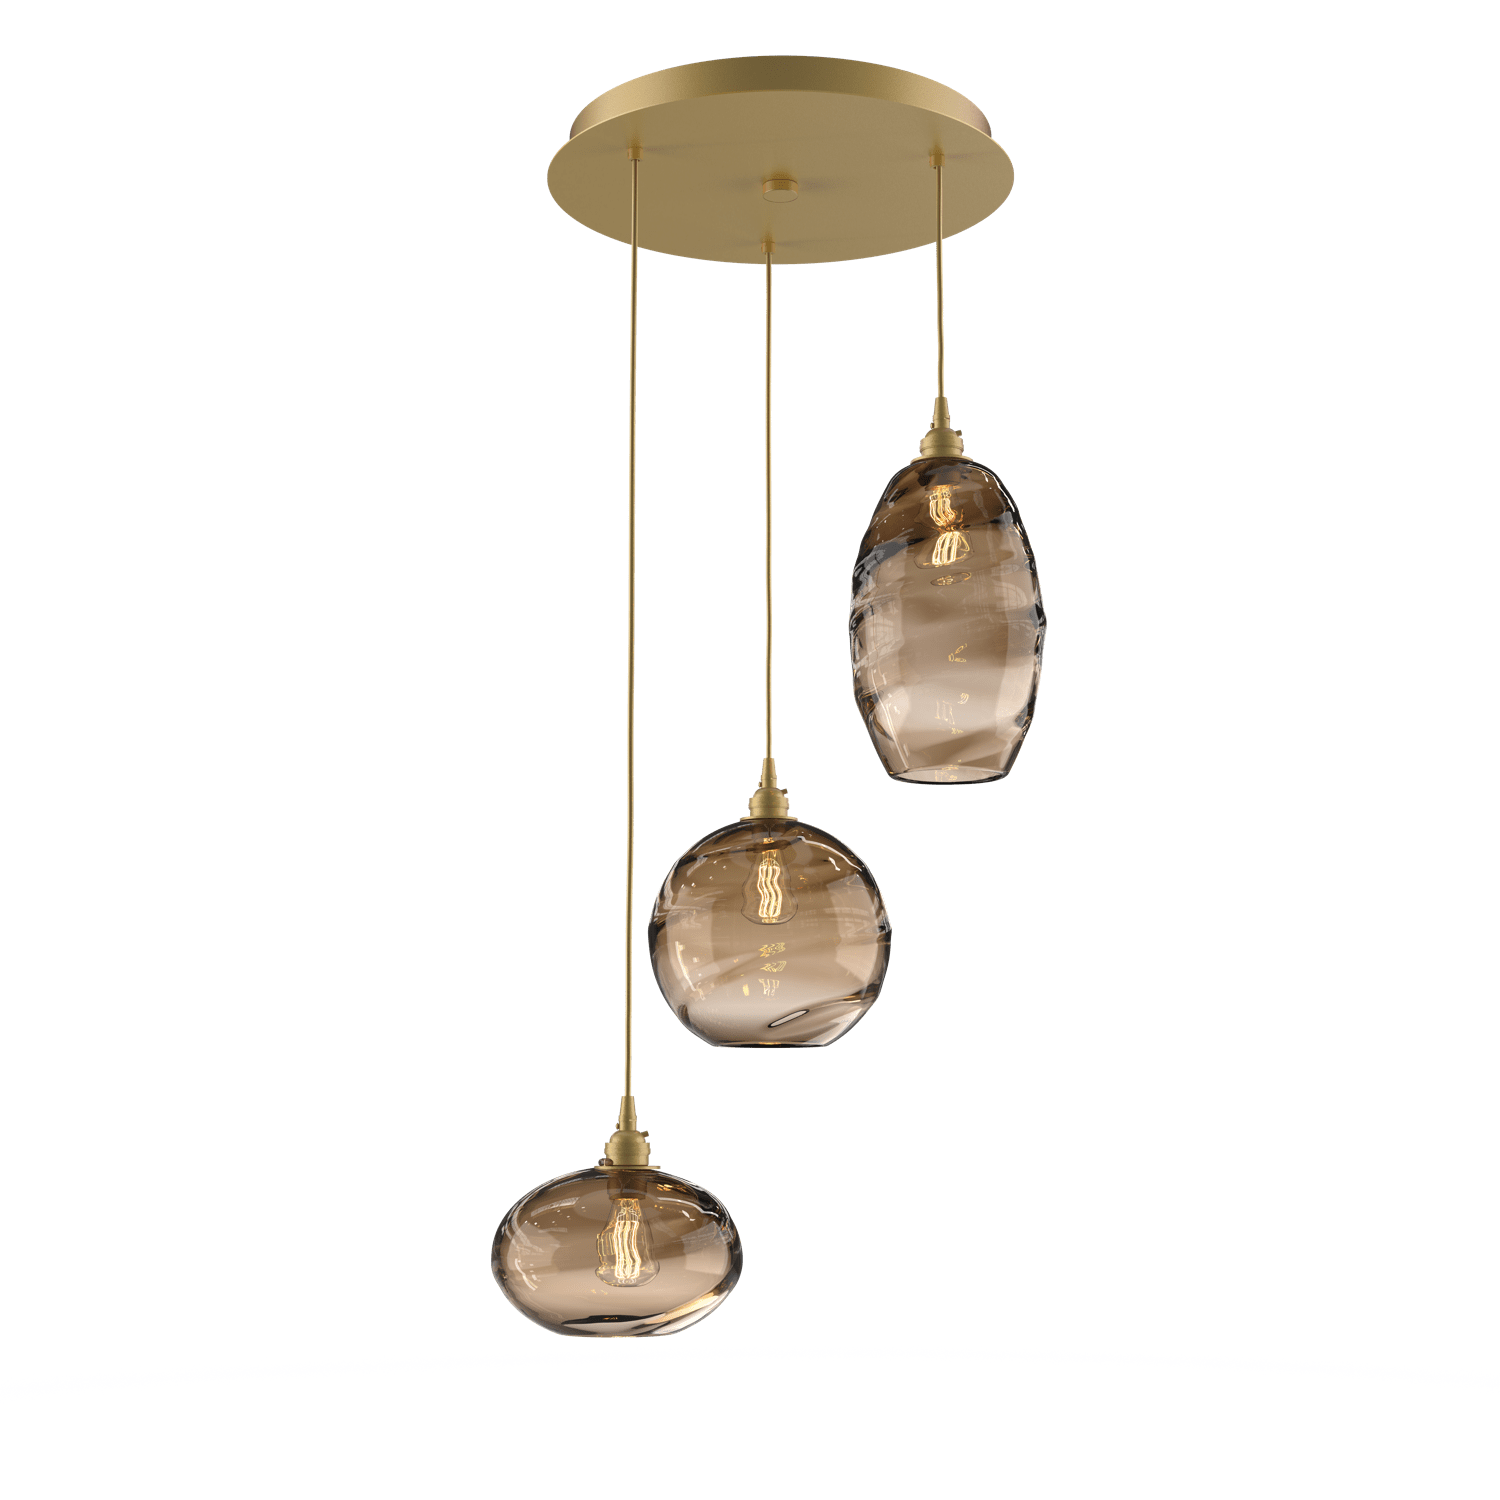 CHB0048-03-GB-OB-Hammerton-Studio-Optic-Blown-Glass-Misto-3-light-round-pendant-chandelier-with-gilded-brass-finish-and-optic-bronze-blown-glass-shades-and-incandescent-lamping